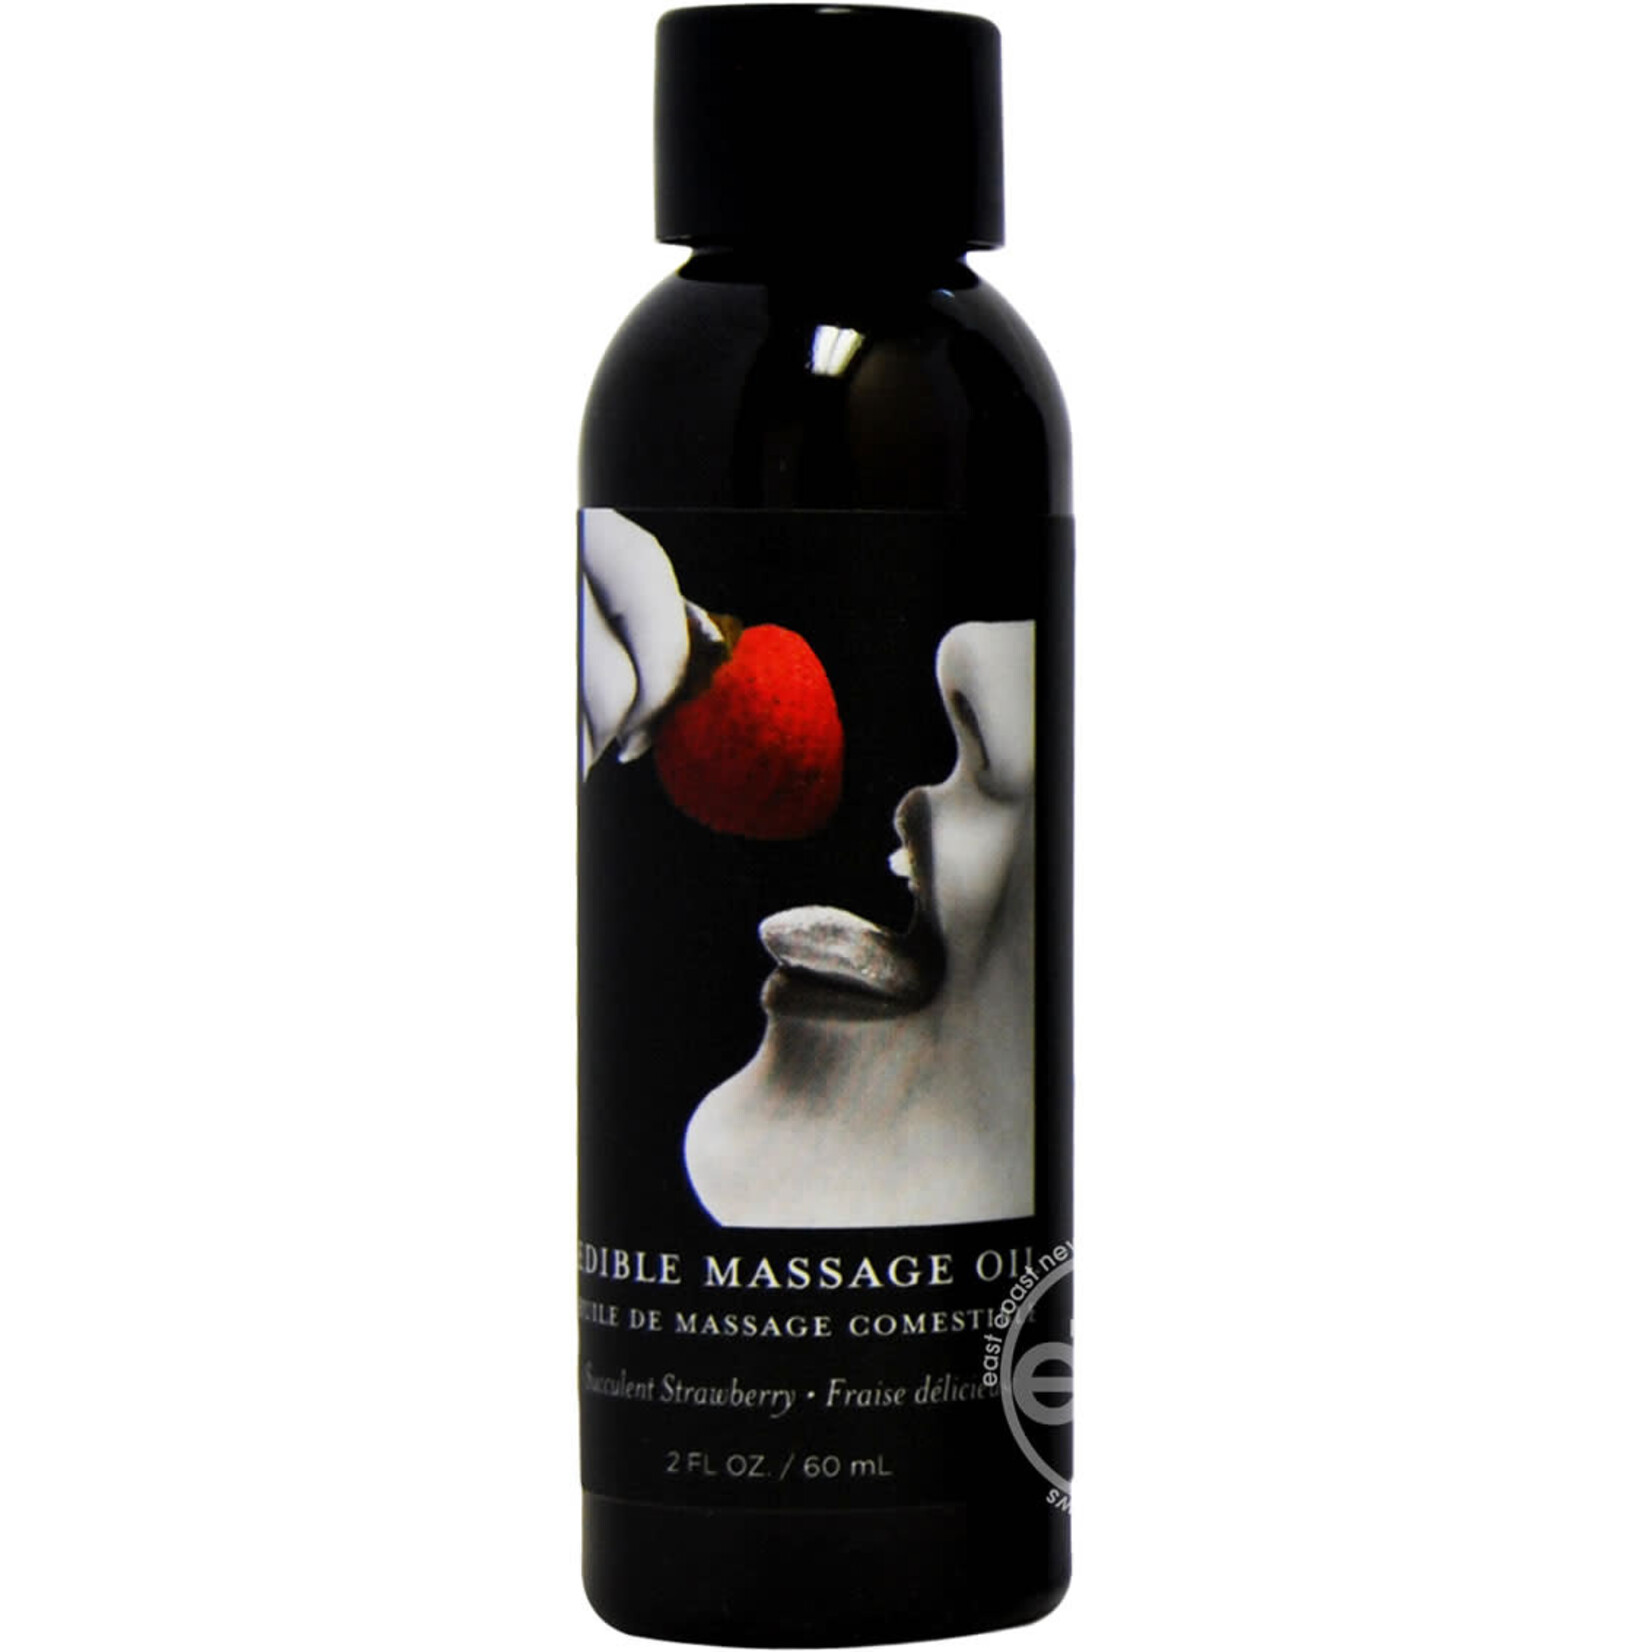 Earthly Body Earthly Body Edible Massage Oil Succulent Strawberry 2oz